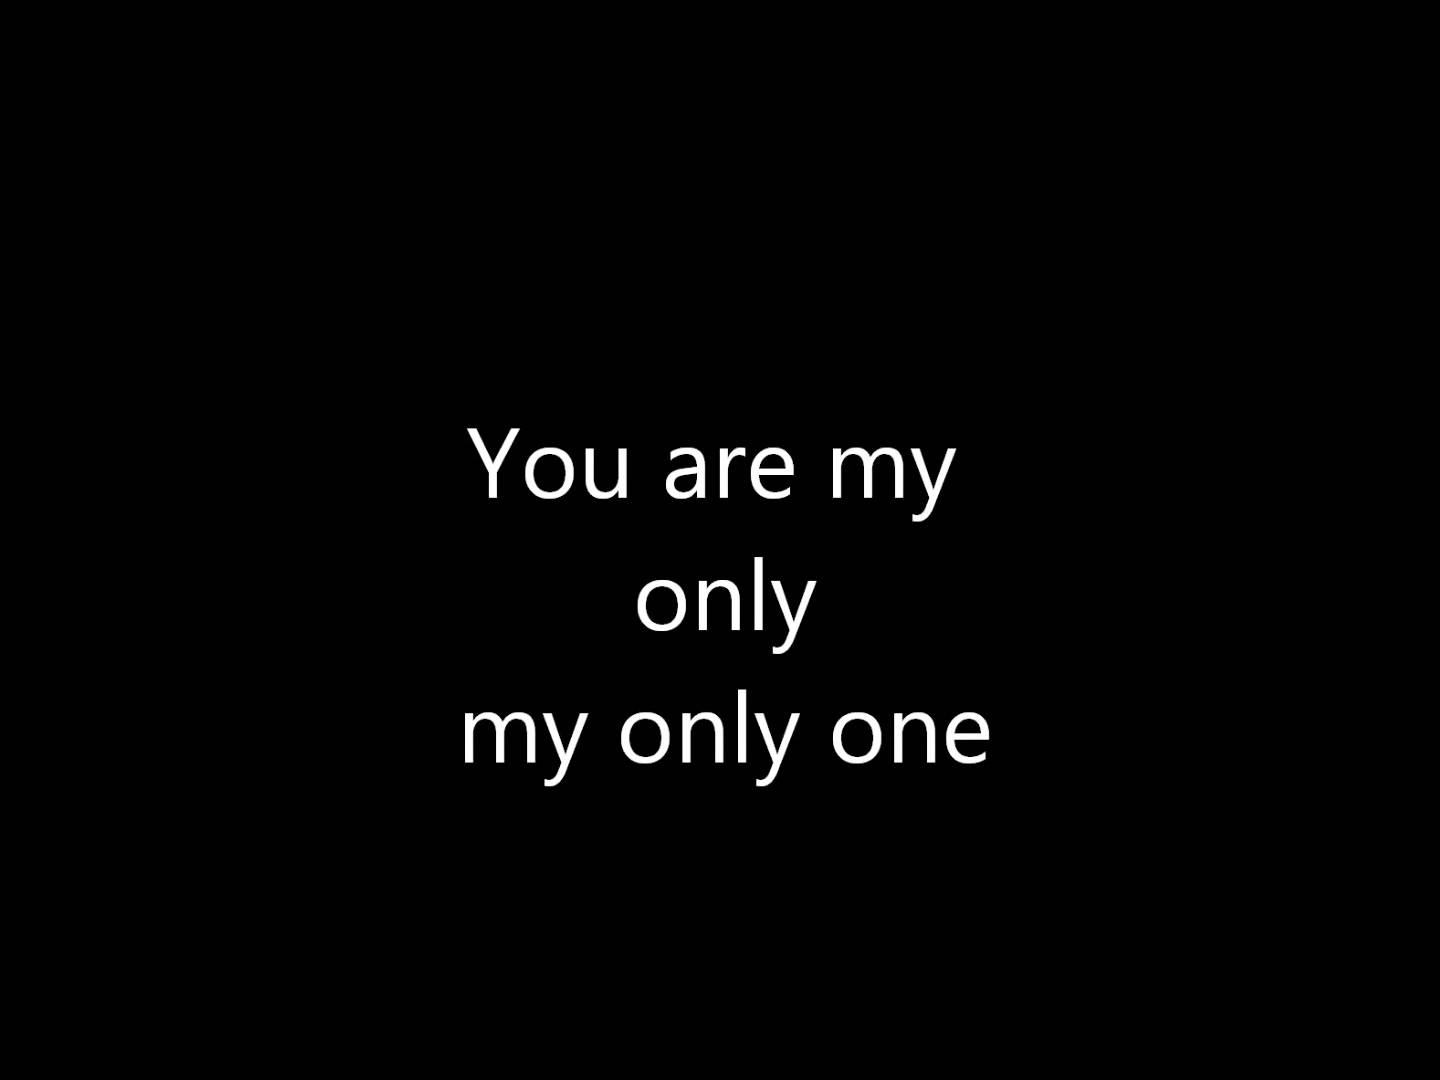 You are my only my only one рисунок